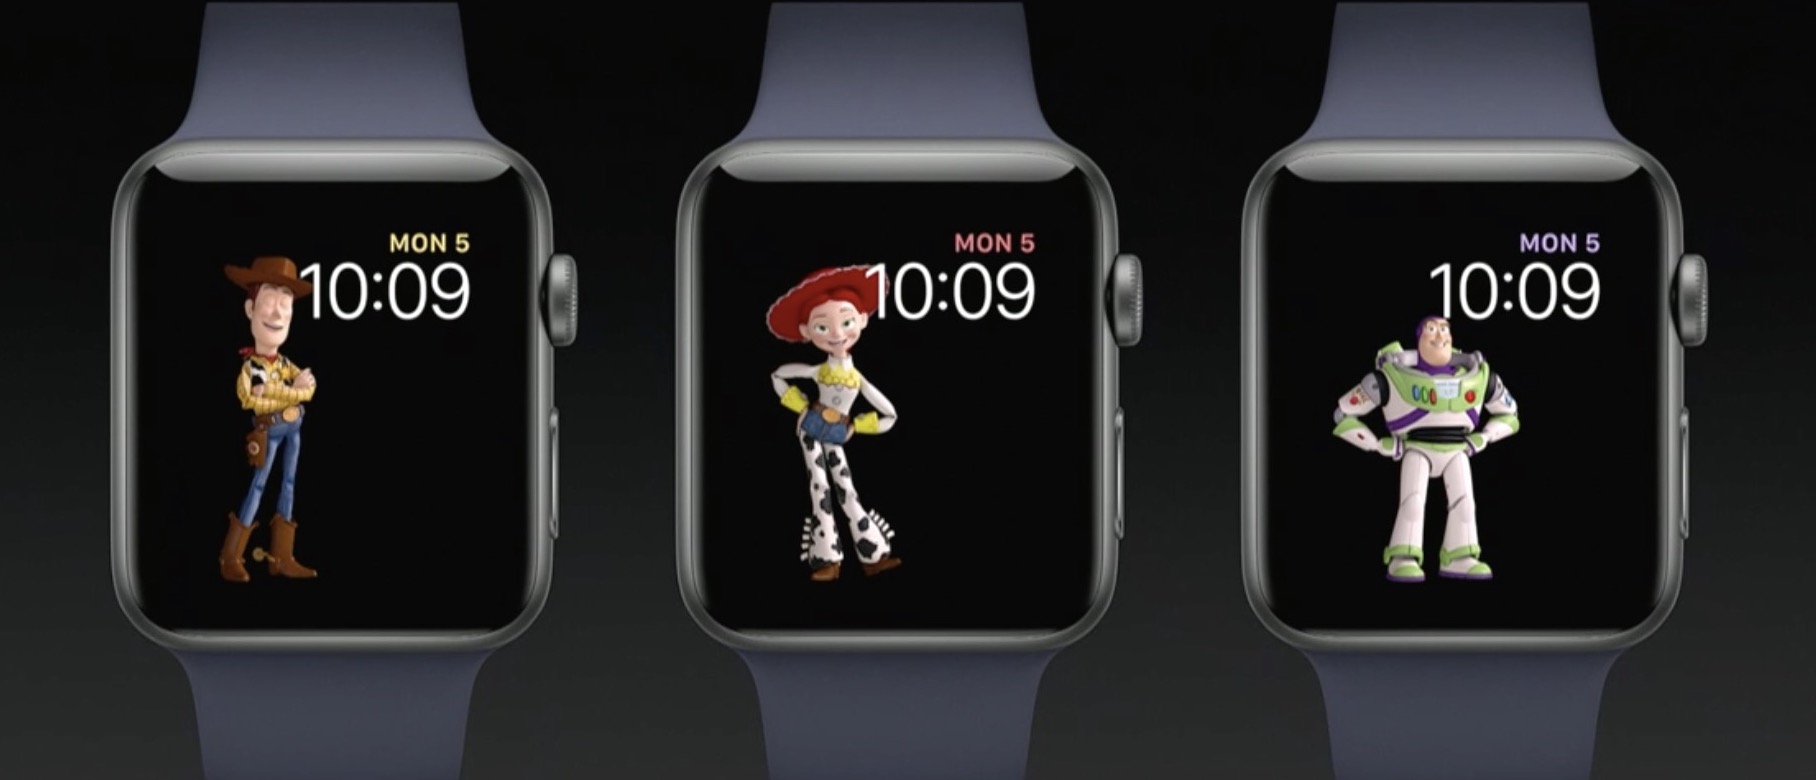 WWDC-2017-toy-story-watch-faces